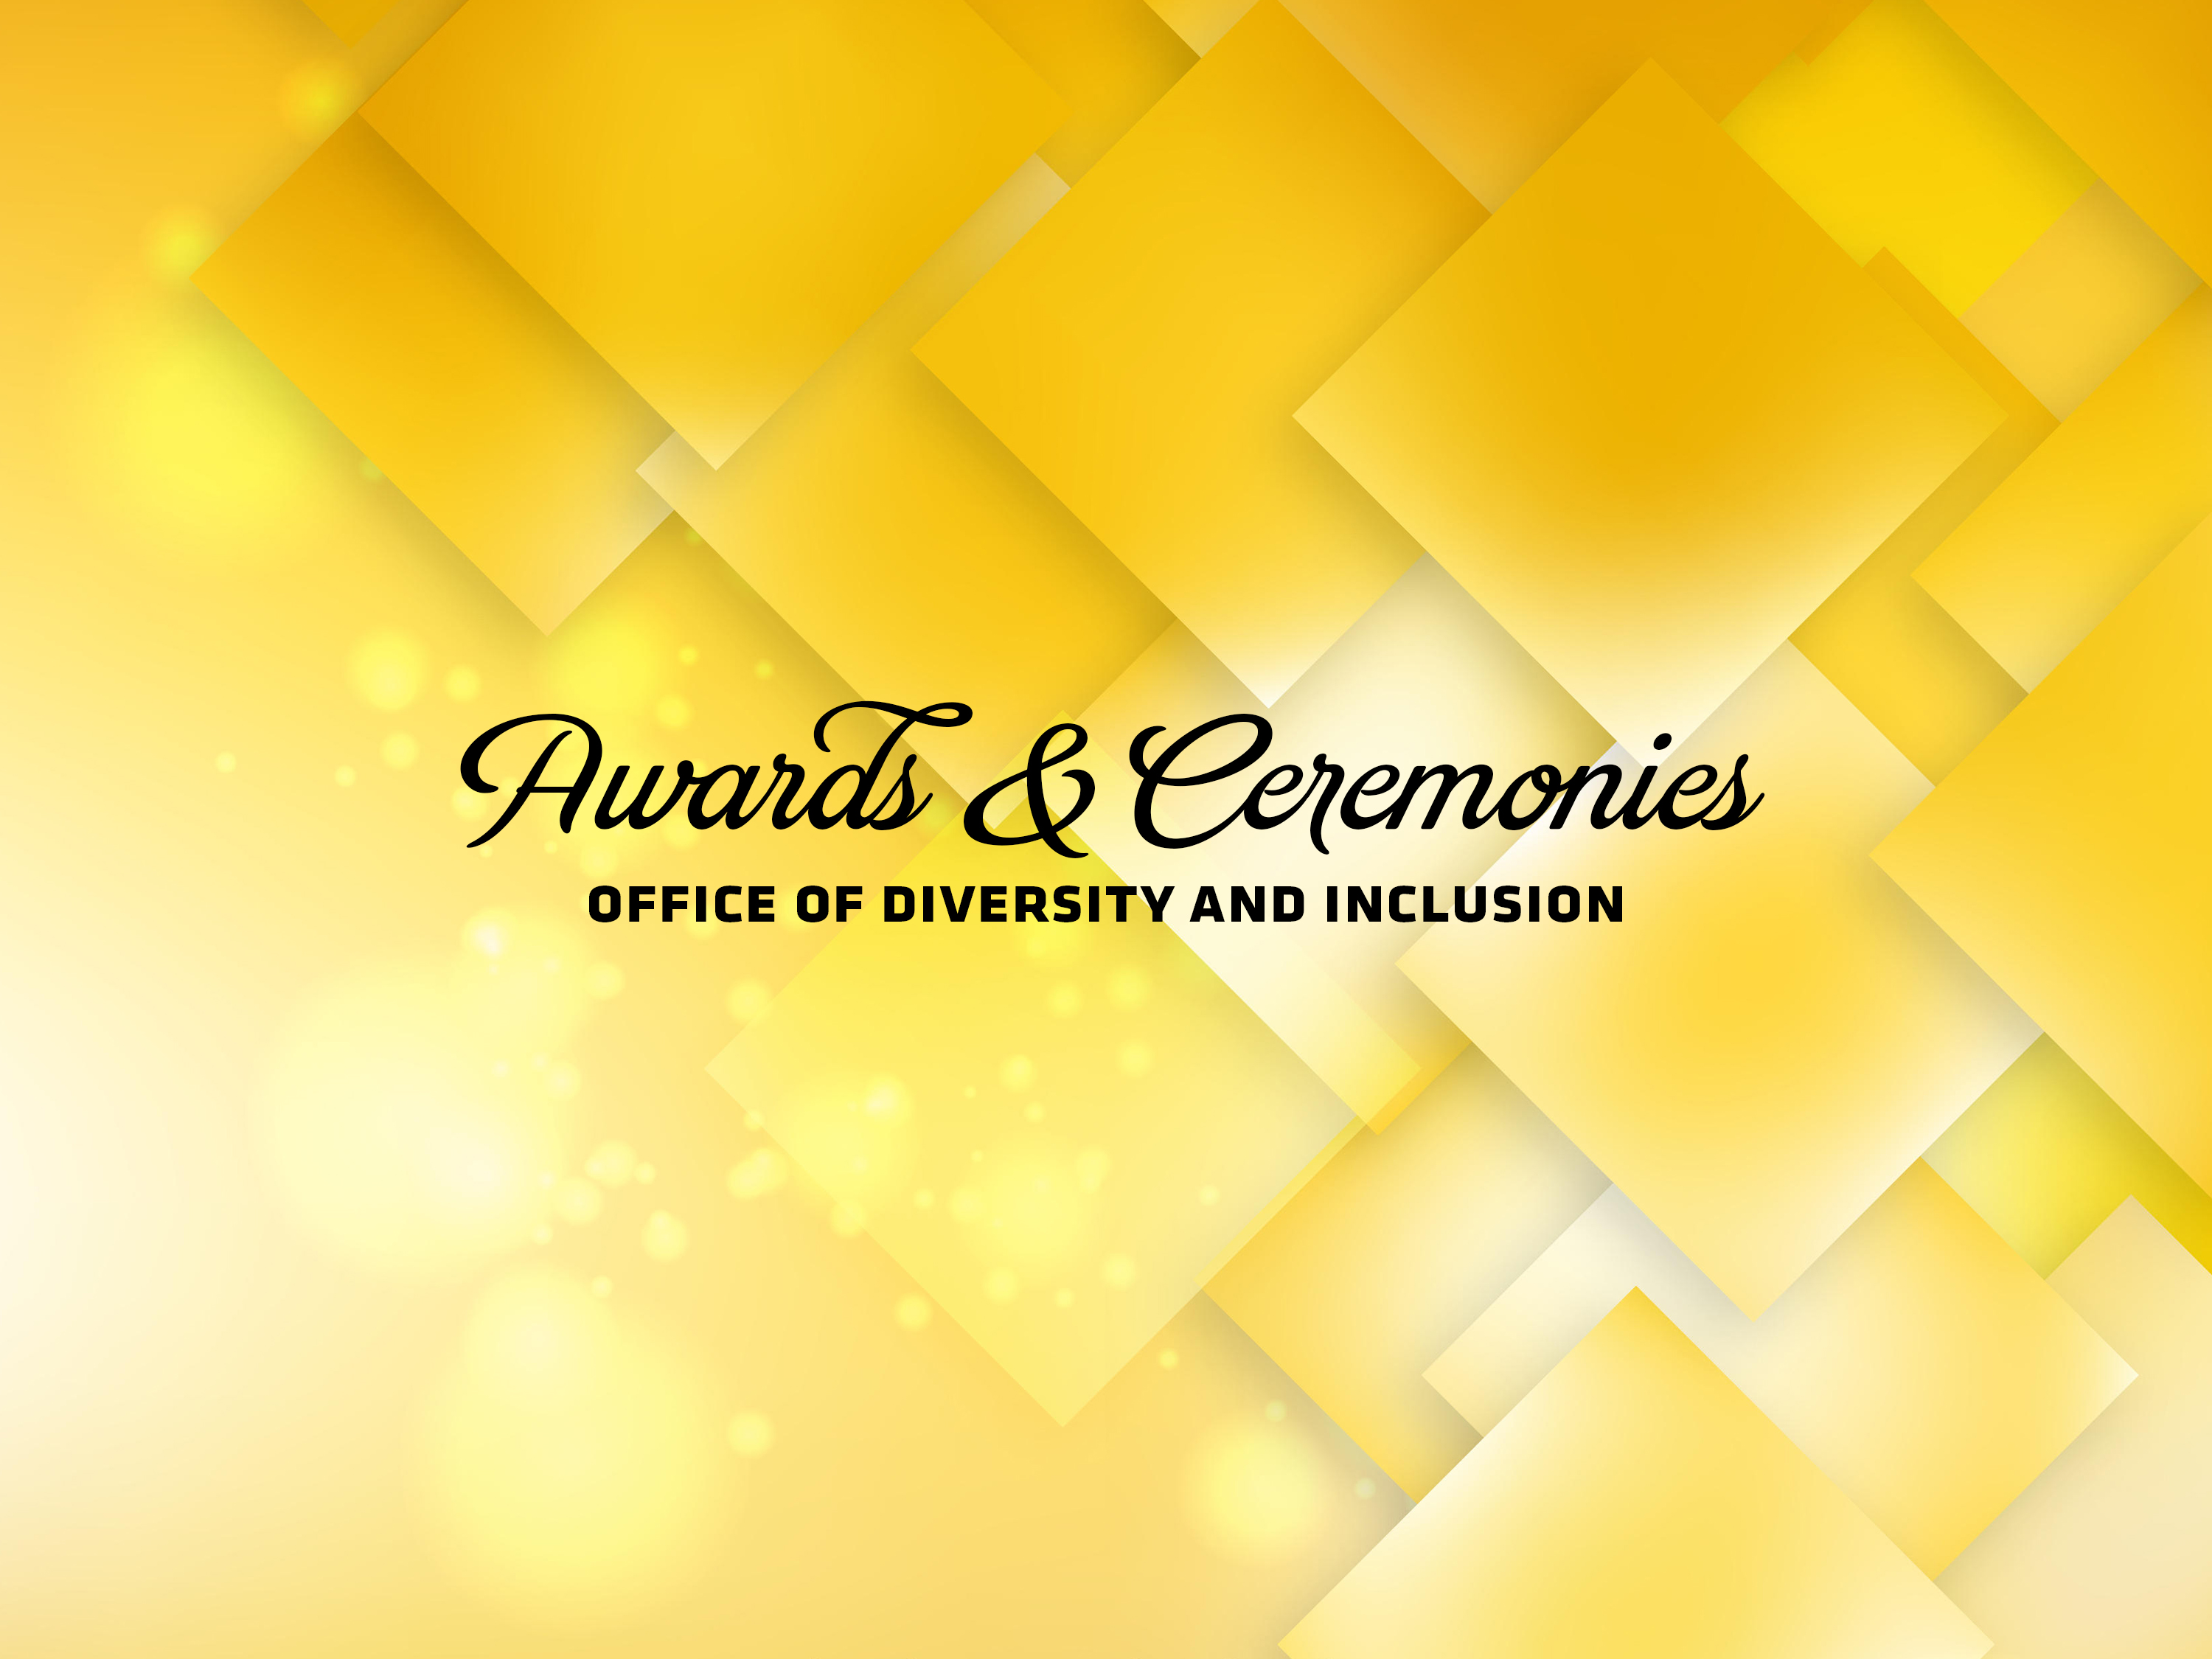 Awards & Ceremonies - Office of Diversity and Inclusion